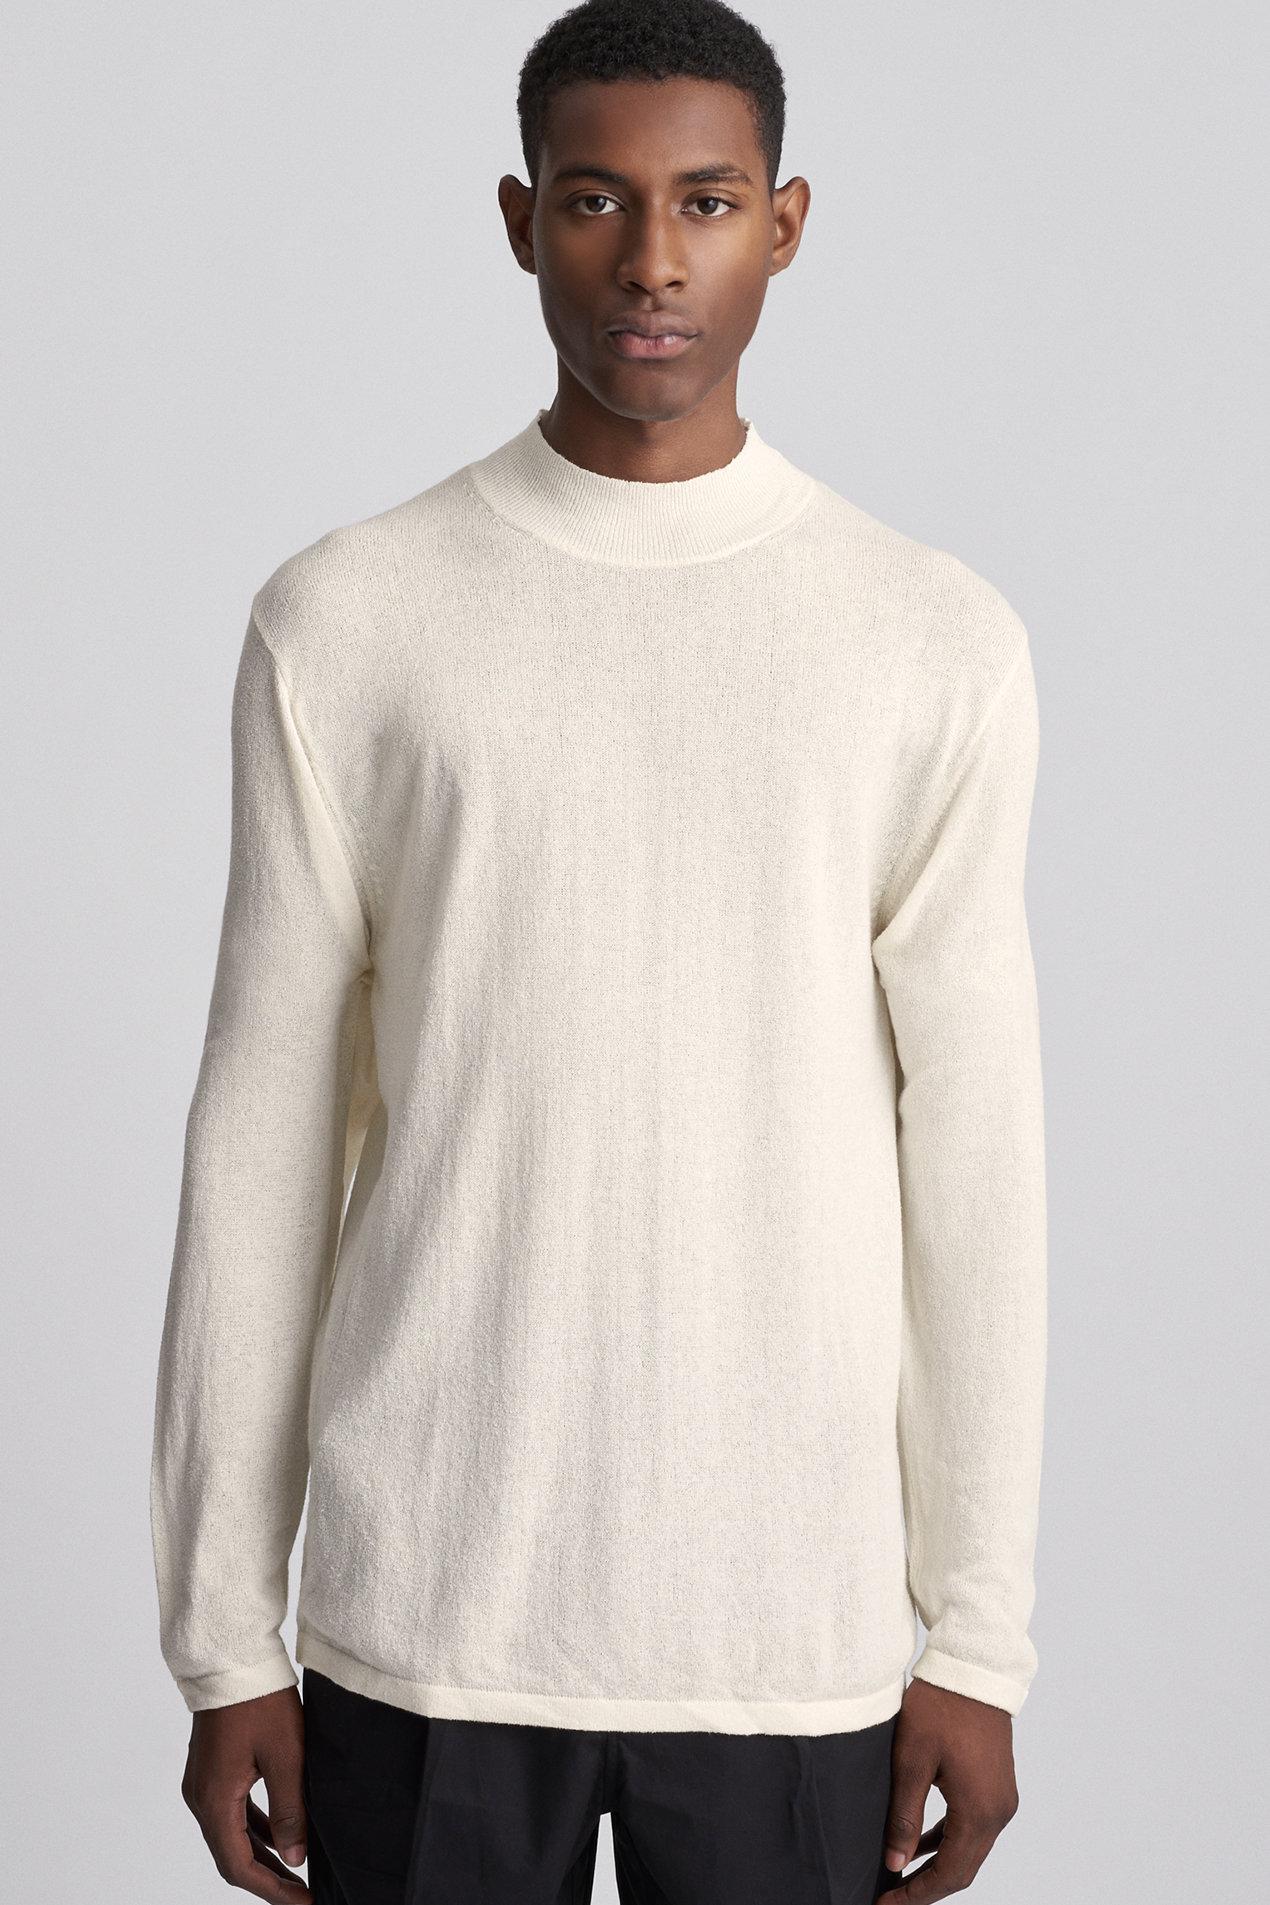 Download Saturdays NYC Sean Crepe Mock Neck Sweater in White for ...